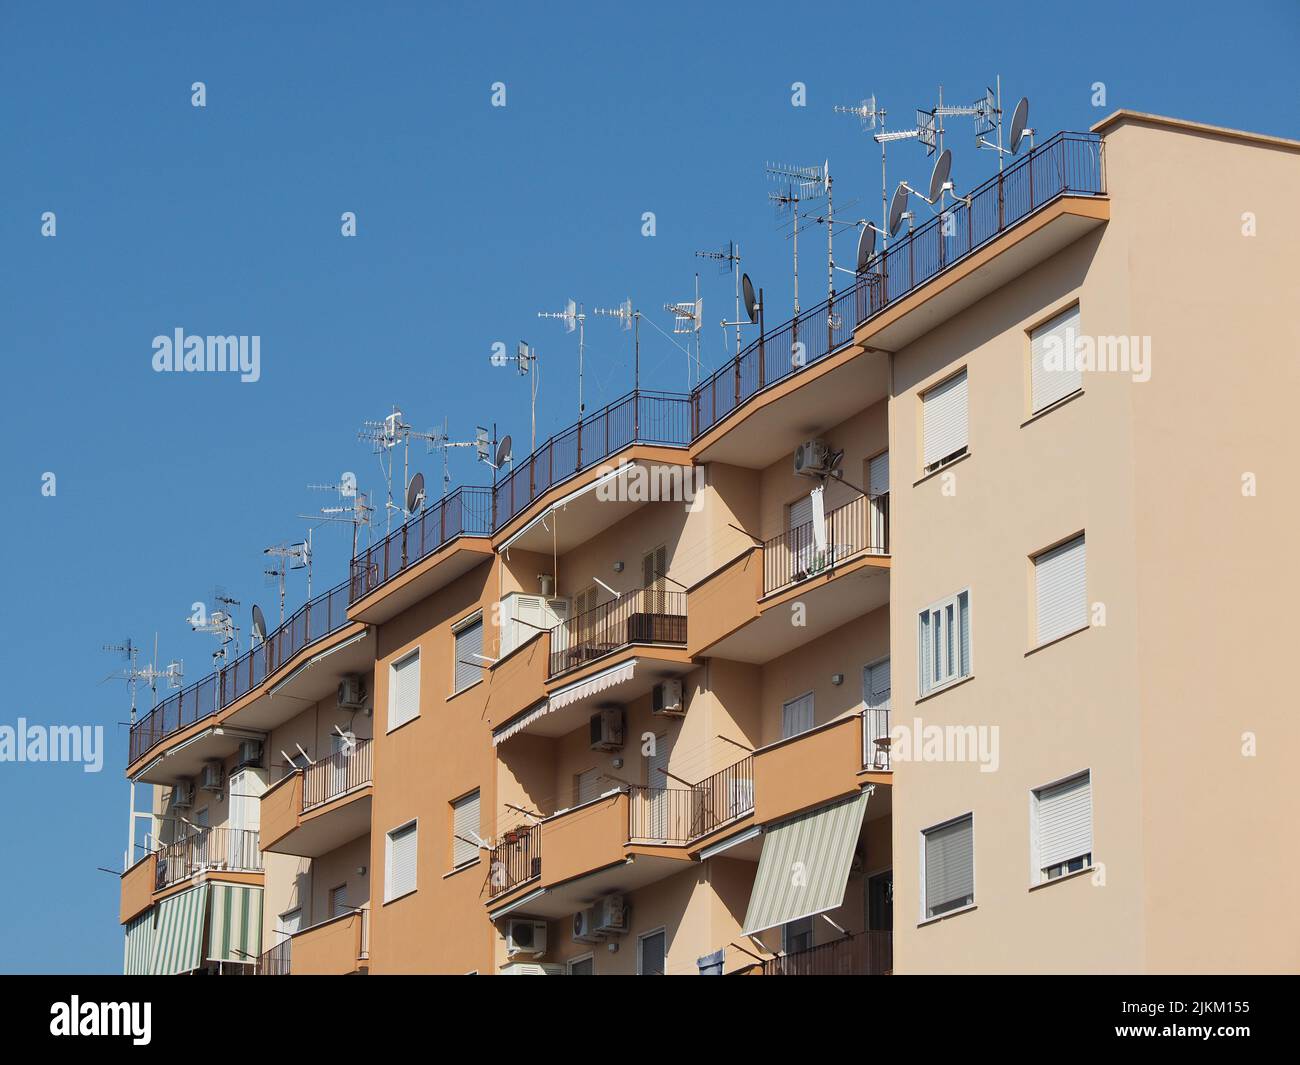 Many television antennas and satellite dishes on the roof of an apartment building in Ercolano, southern Italy Stock Photo